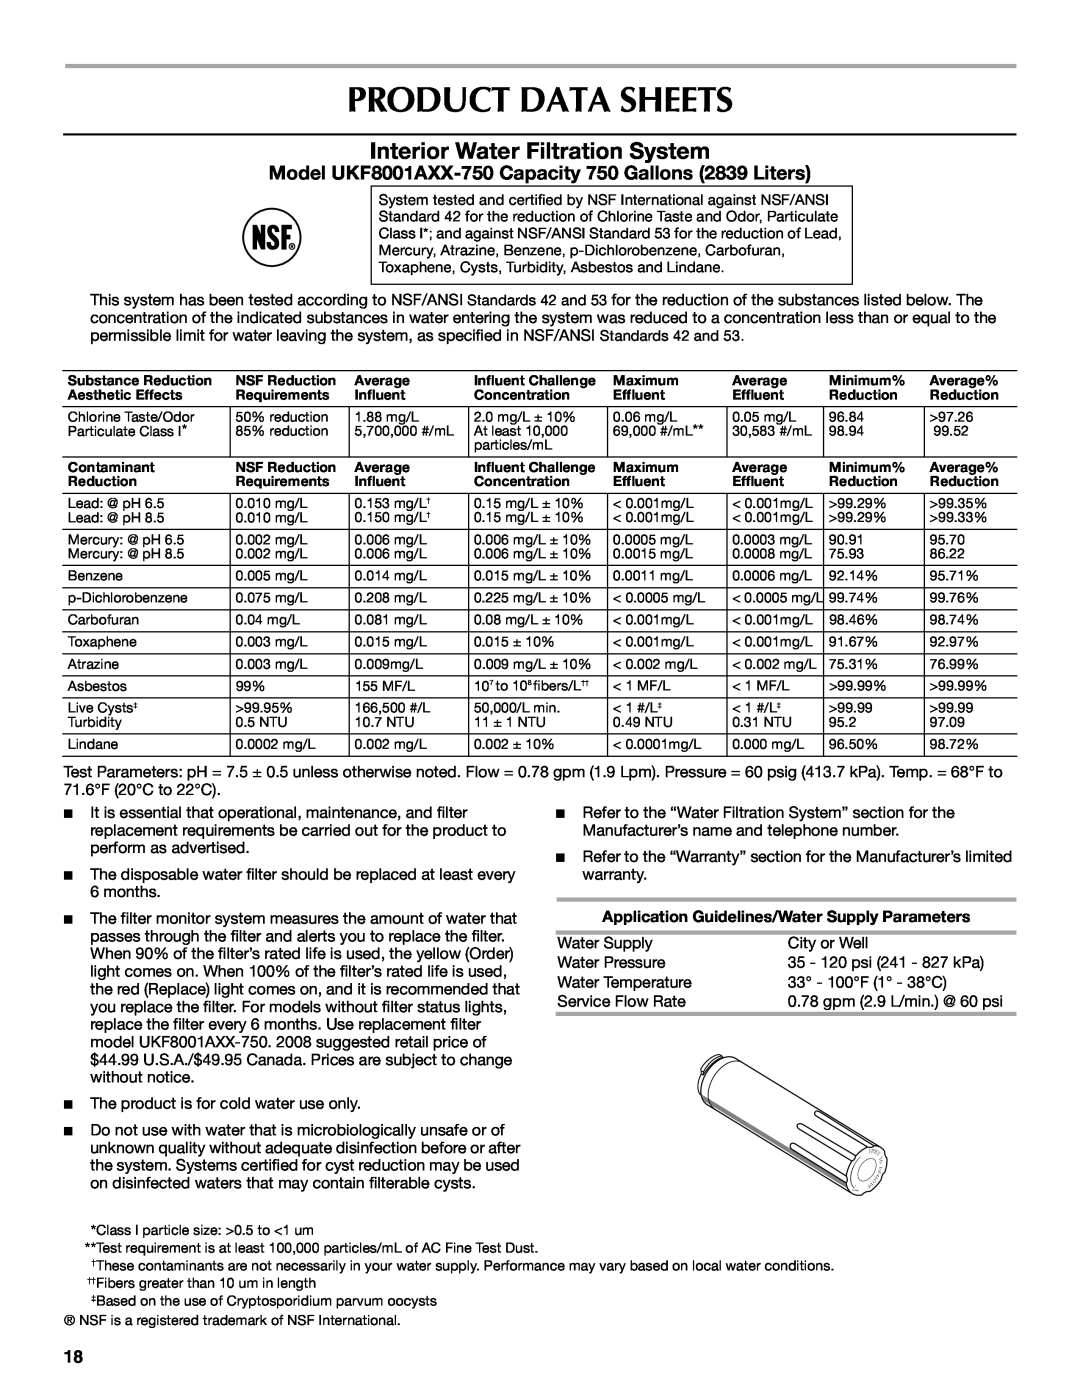 Maytag W10208790A Product Data Sheets, Interior Water Filtration System, Application Guidelines/Water Supply Parameters 